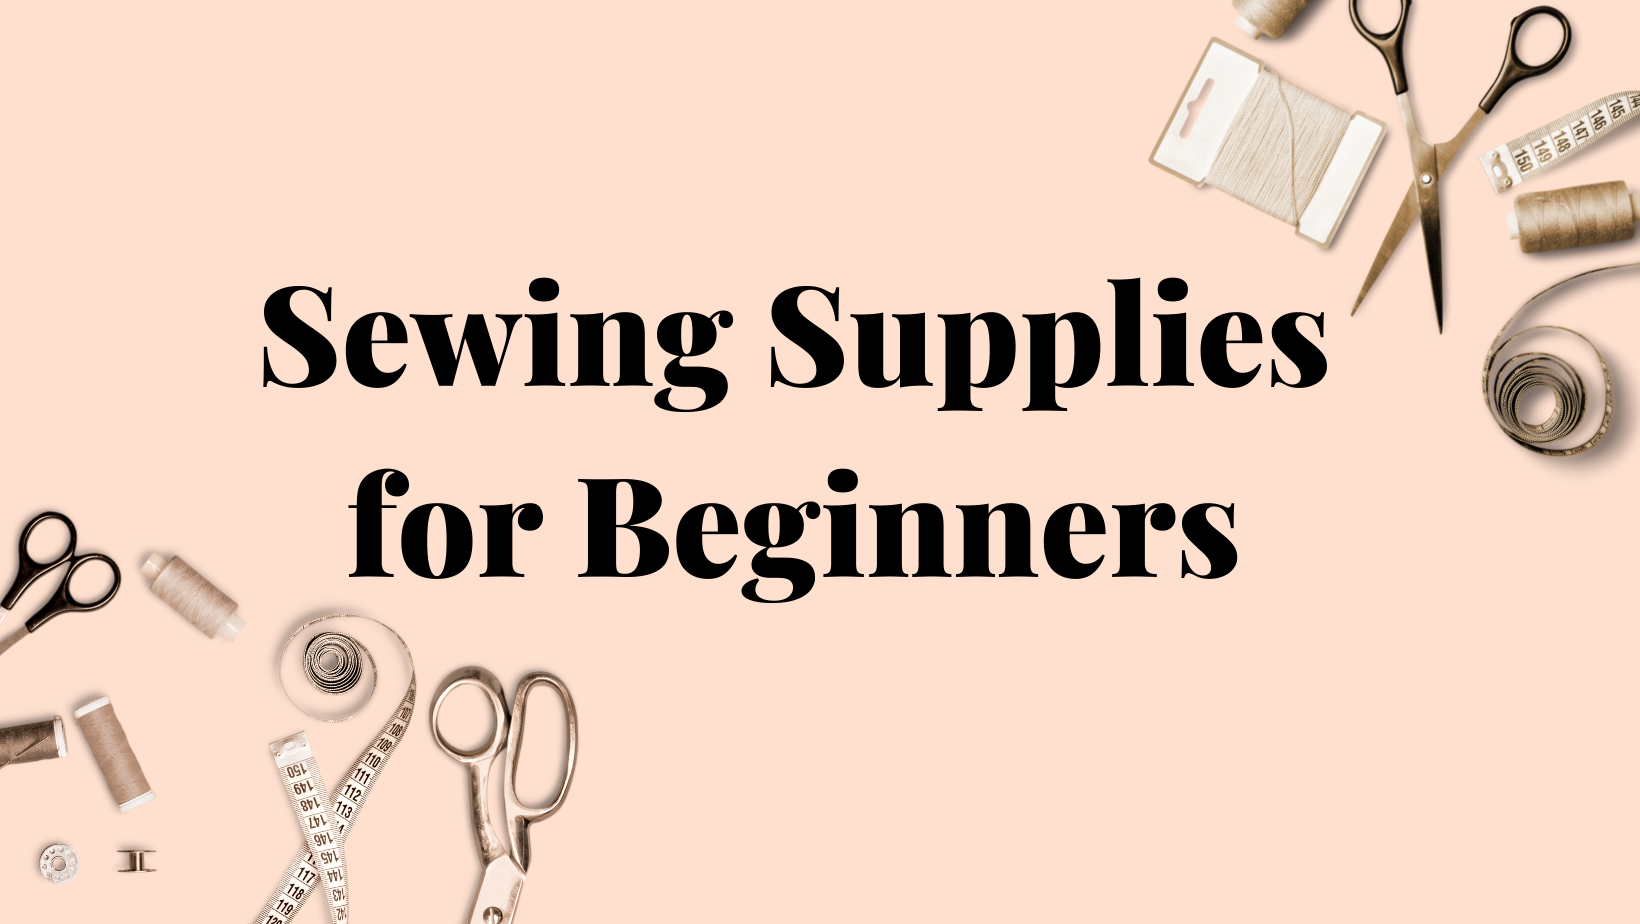 What are Basic Sewing Supplies?